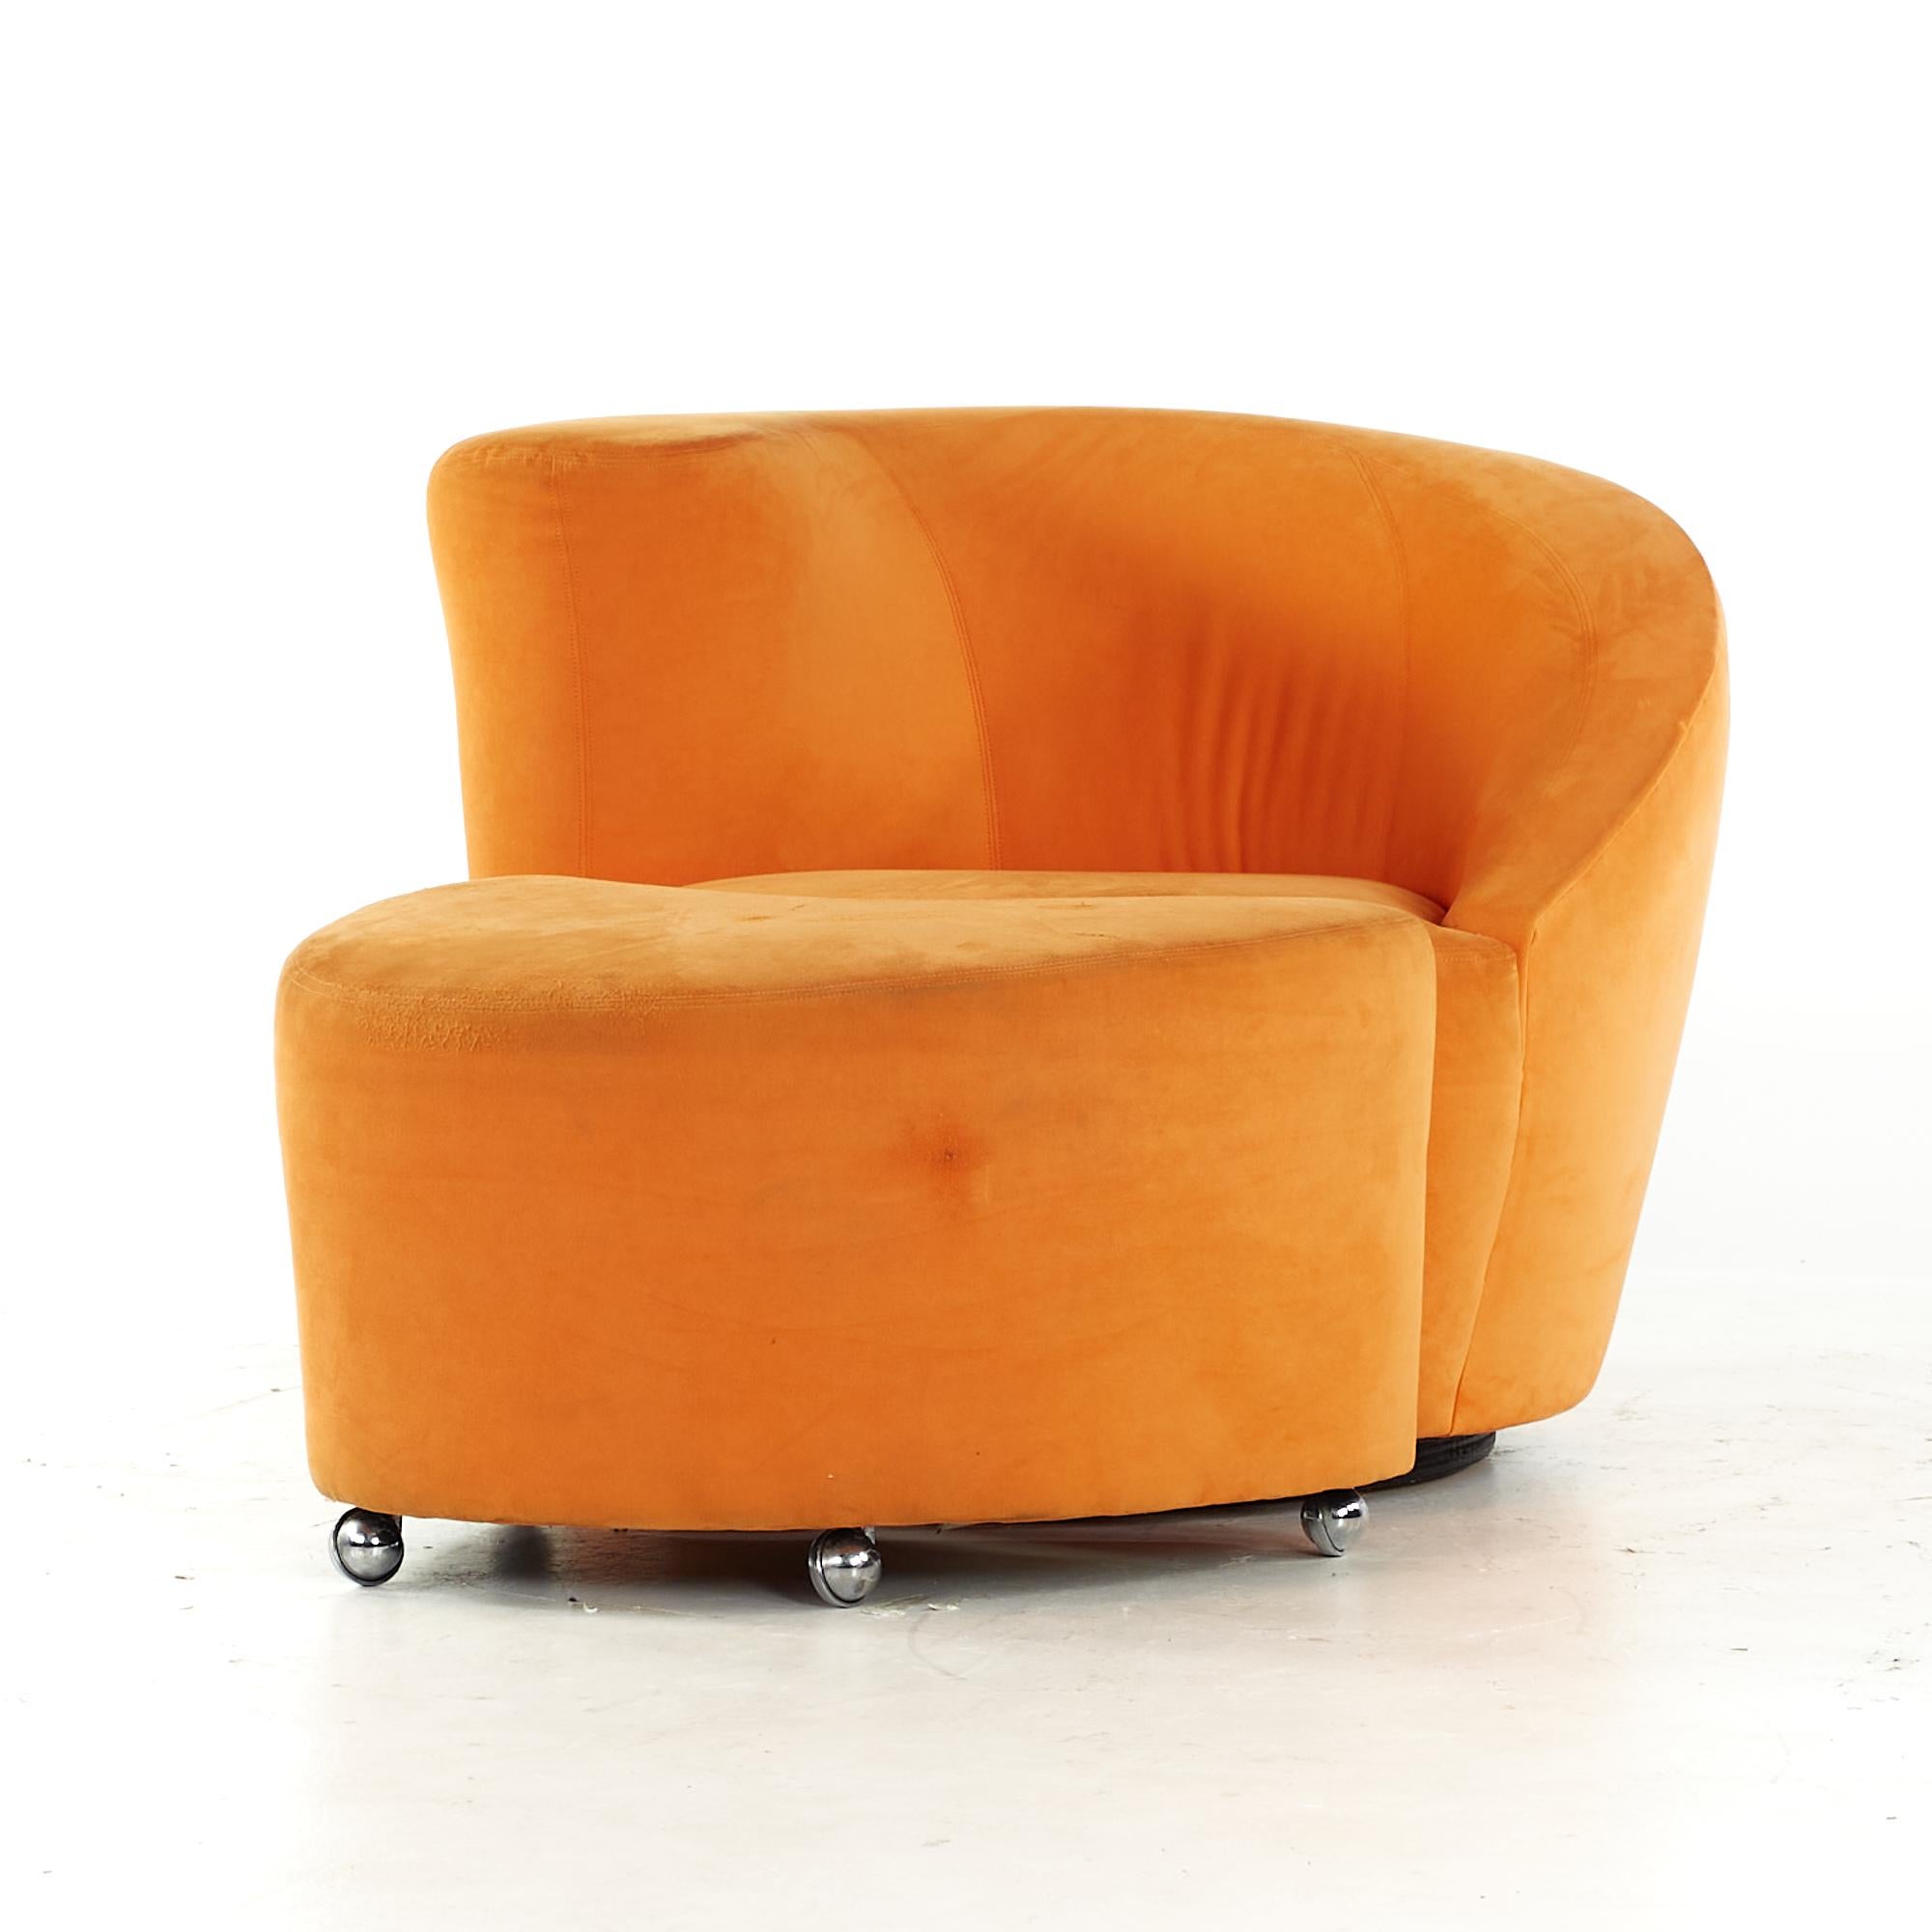 Late 20th Century Kagan for Directional Midcentury Lounge Chairs with Ottoman, Pair For Sale